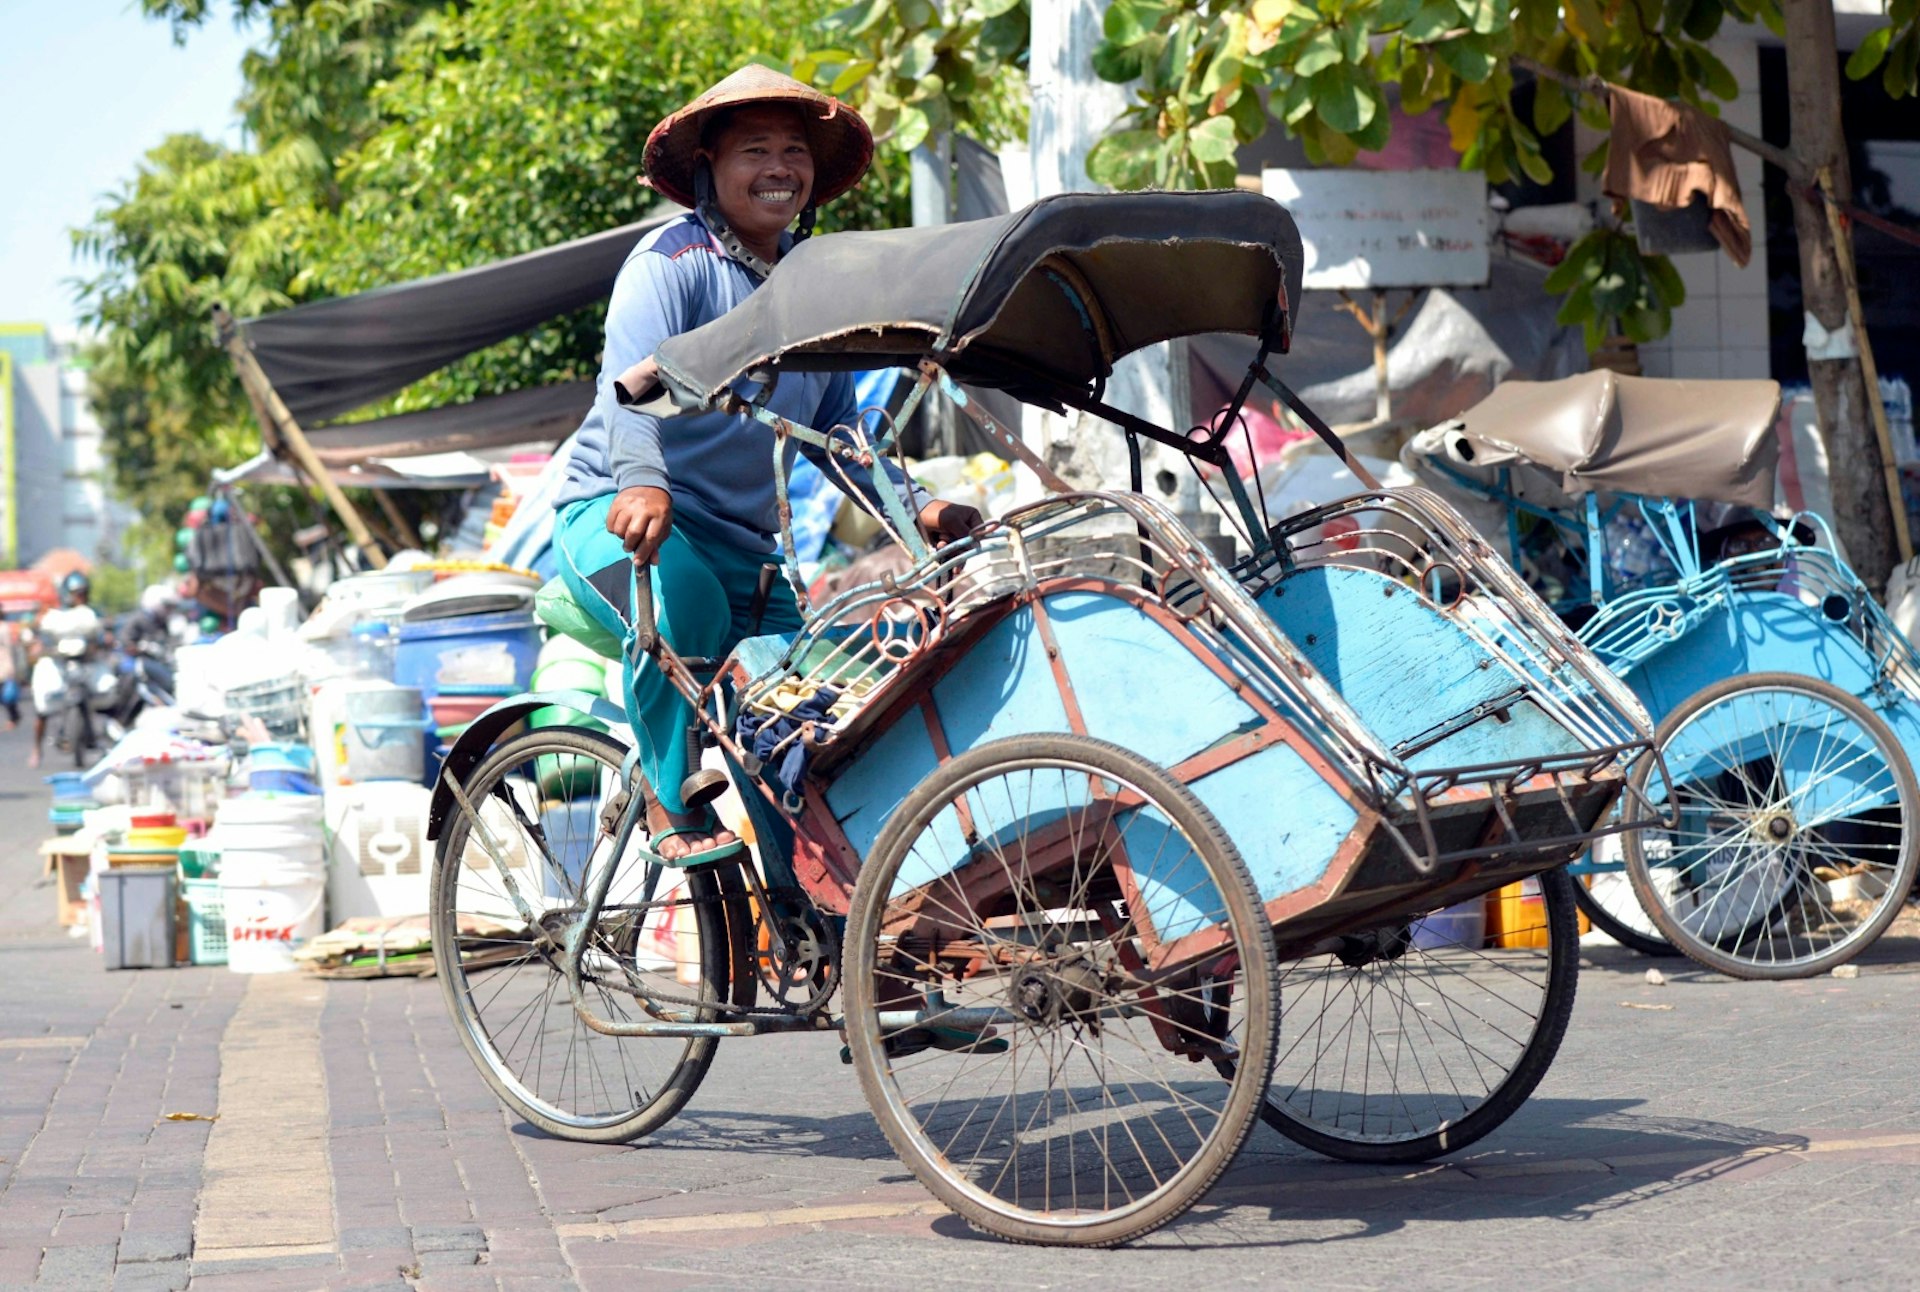 A trishaw driver smiles for a photo in Semarang, Central Java, Indonesia © Mark Eveleigh / Lonely Planet